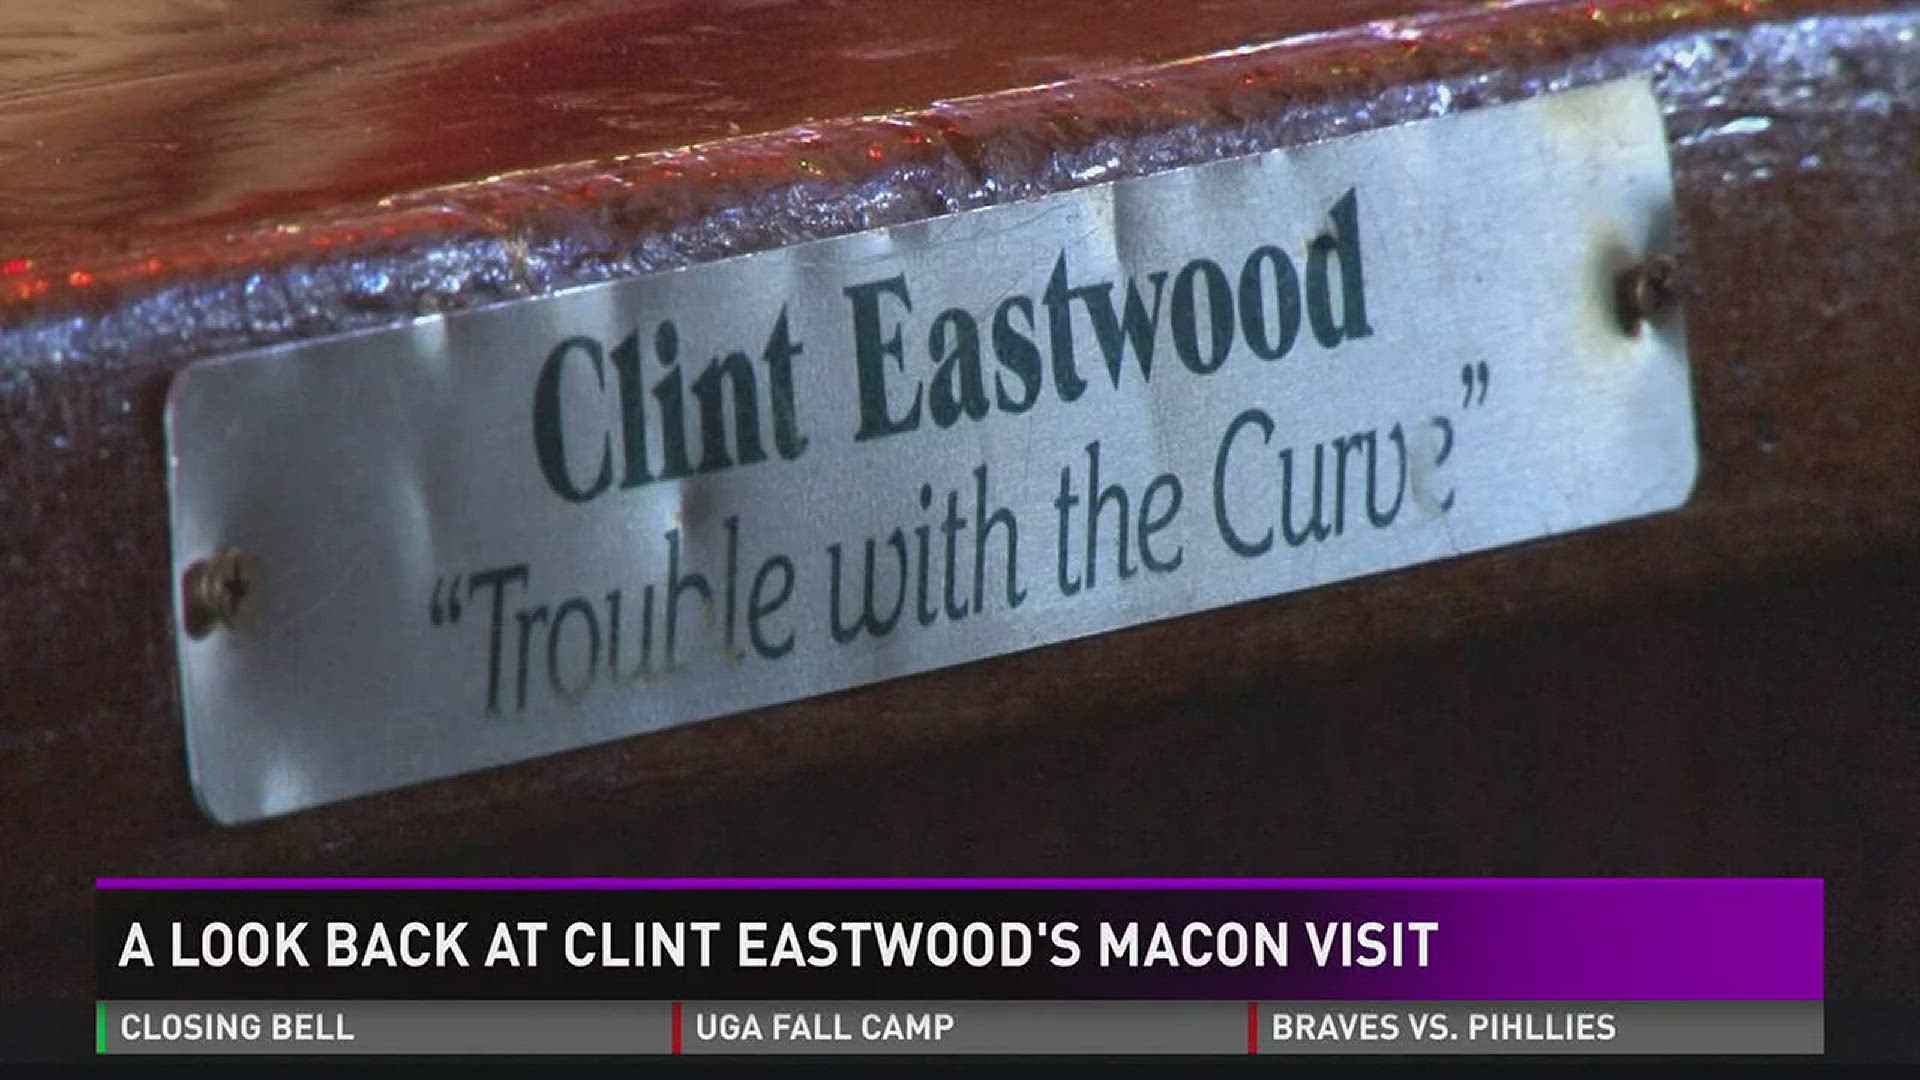 A look back at Clint Eastwood's Macon visit